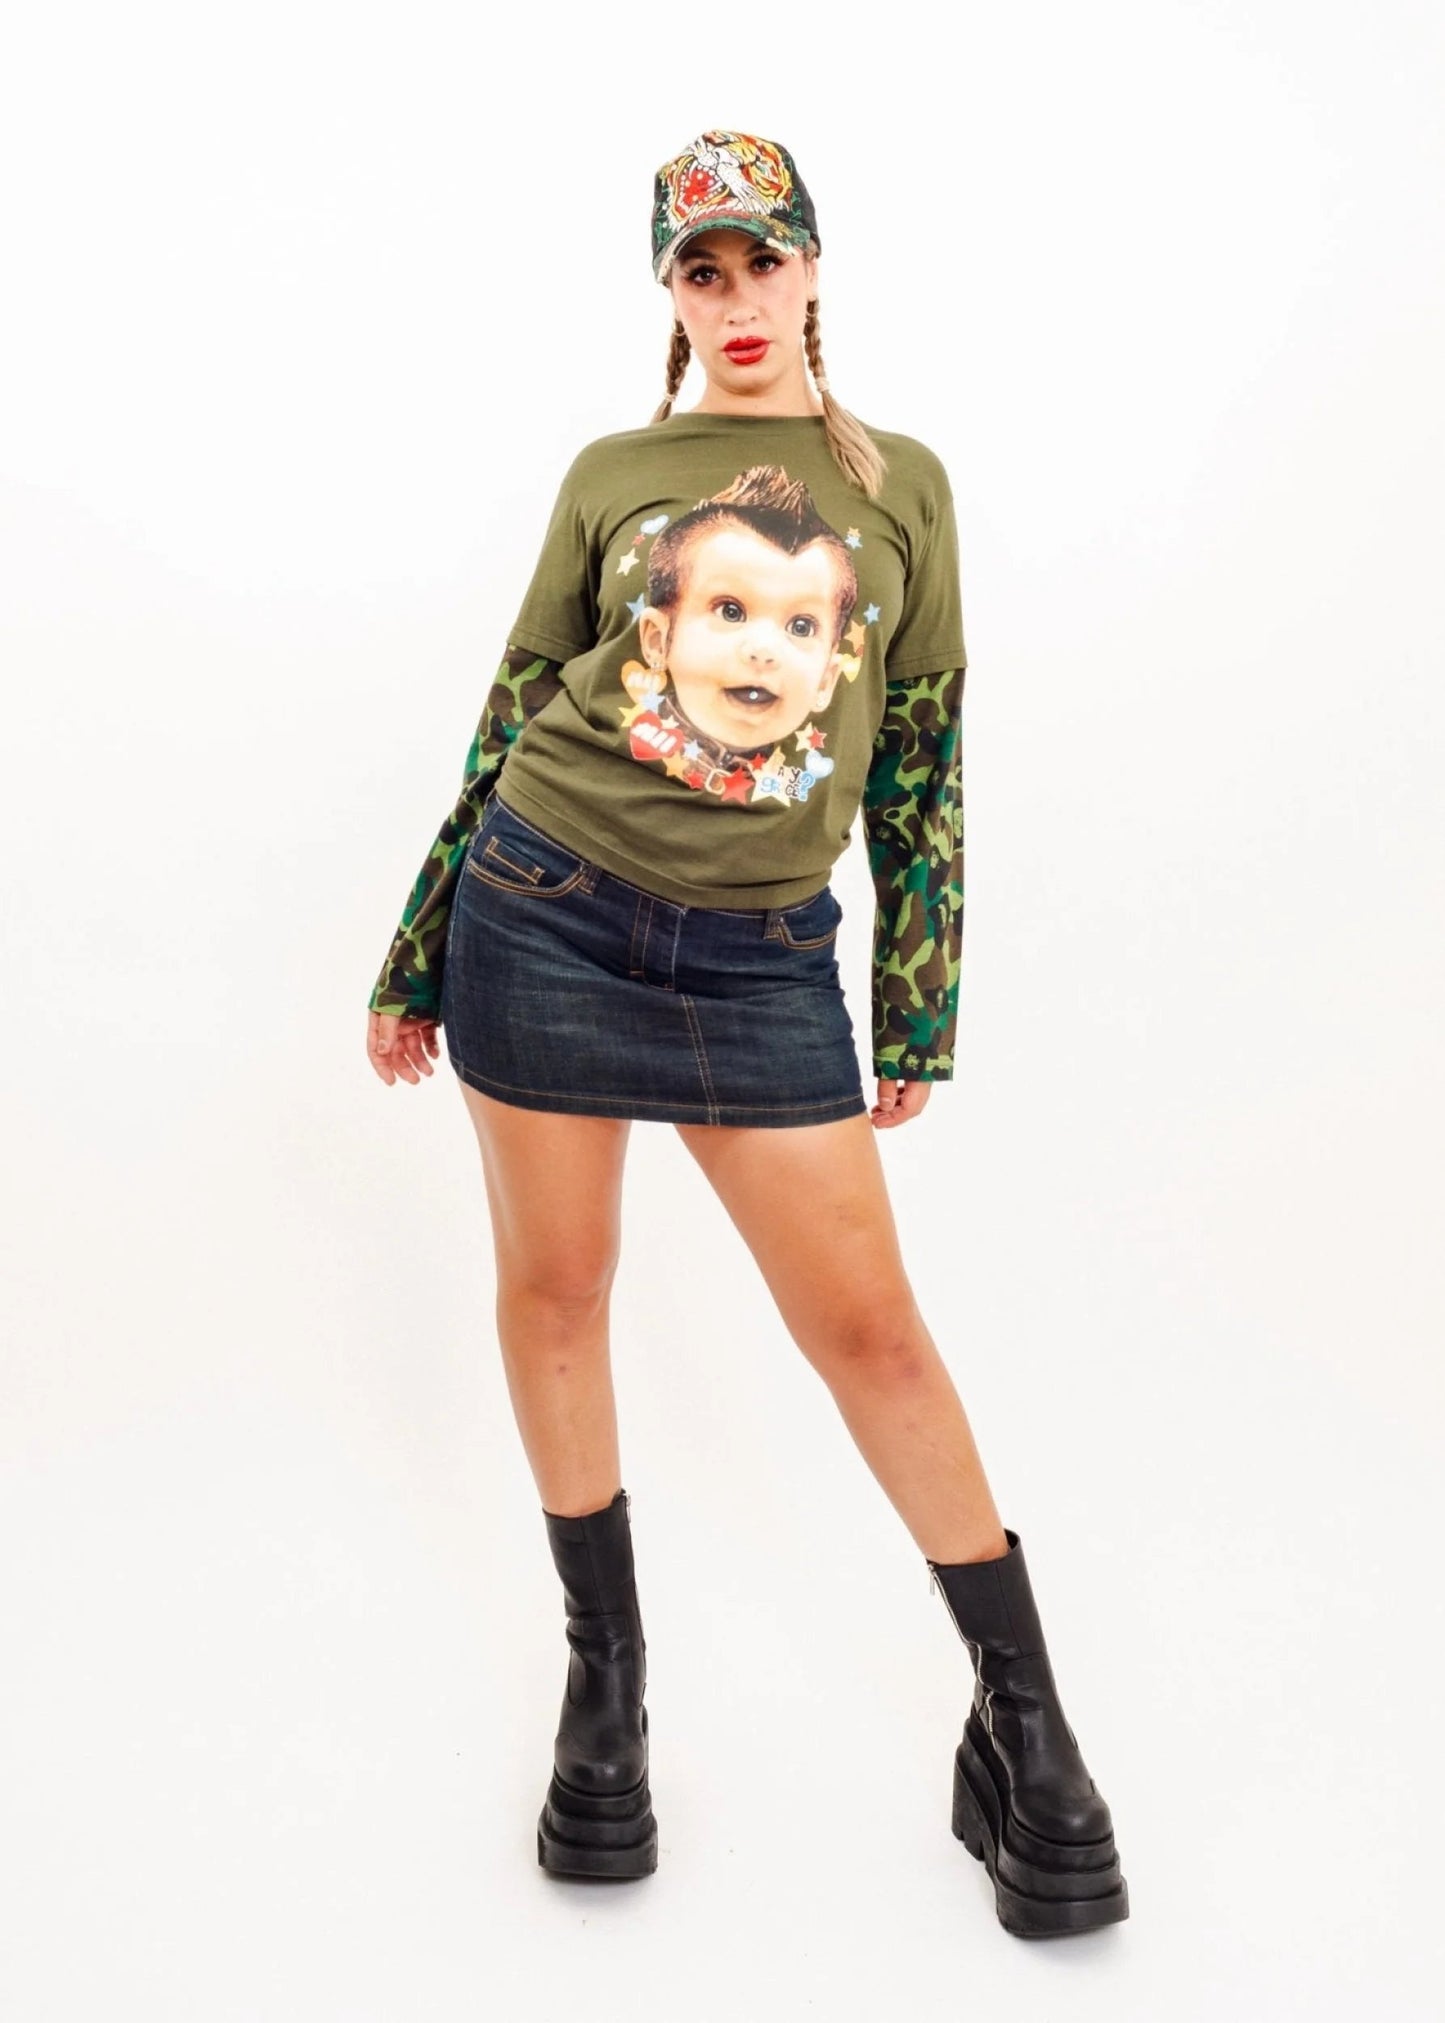 Heavy Metal Pierced Punk Baby Tee with camo sleeves